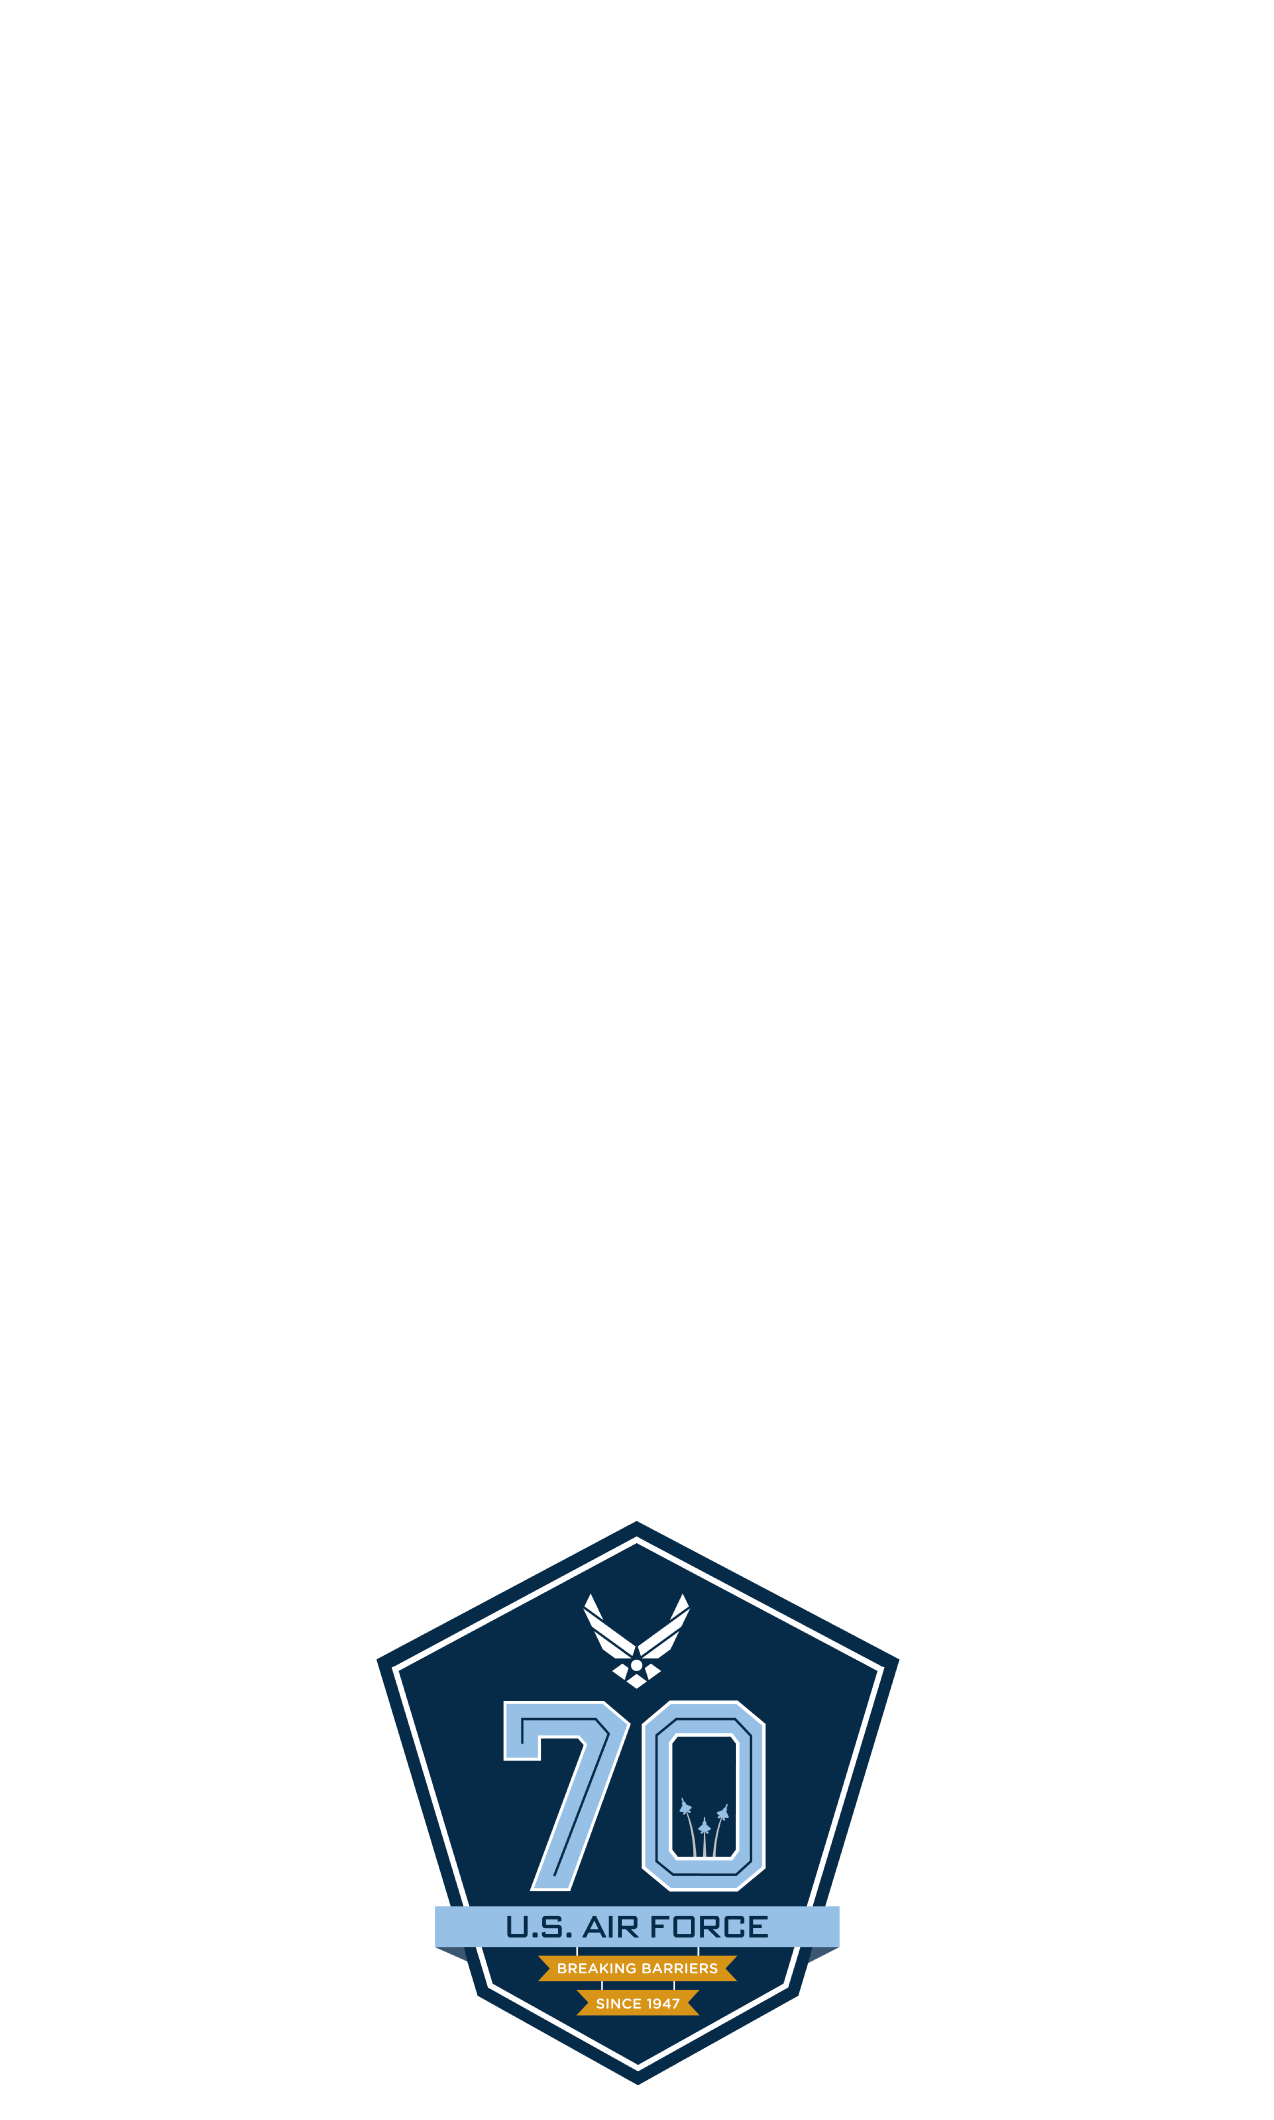 United States Air Force birthday, American Airmen breaking barriers since 1947